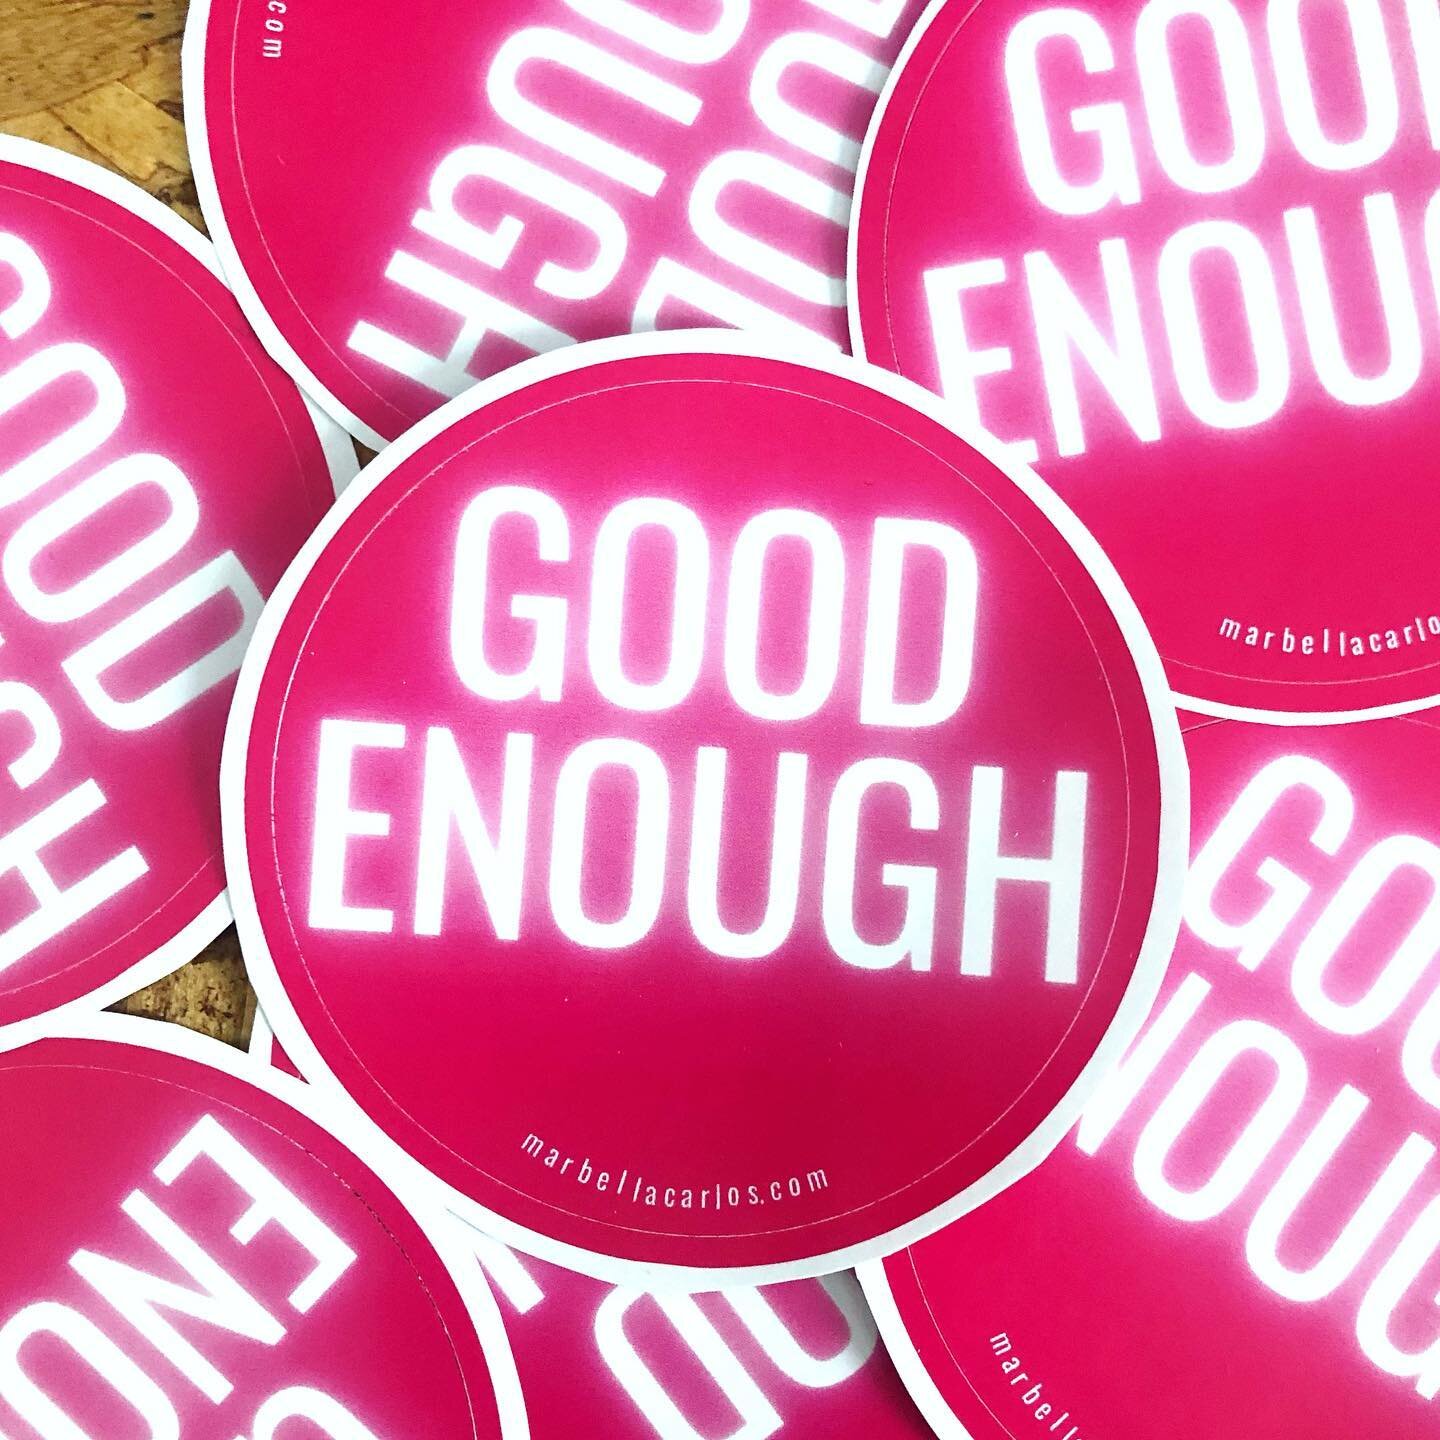 Some stickers I had made to give to friends and clients. 💖
.
We don&rsquo;t have to be perfect, we just have to be good enough!
.
Sometimes (especially in times like these) we need to challenge our expectations for ourselves, and give ourselves some